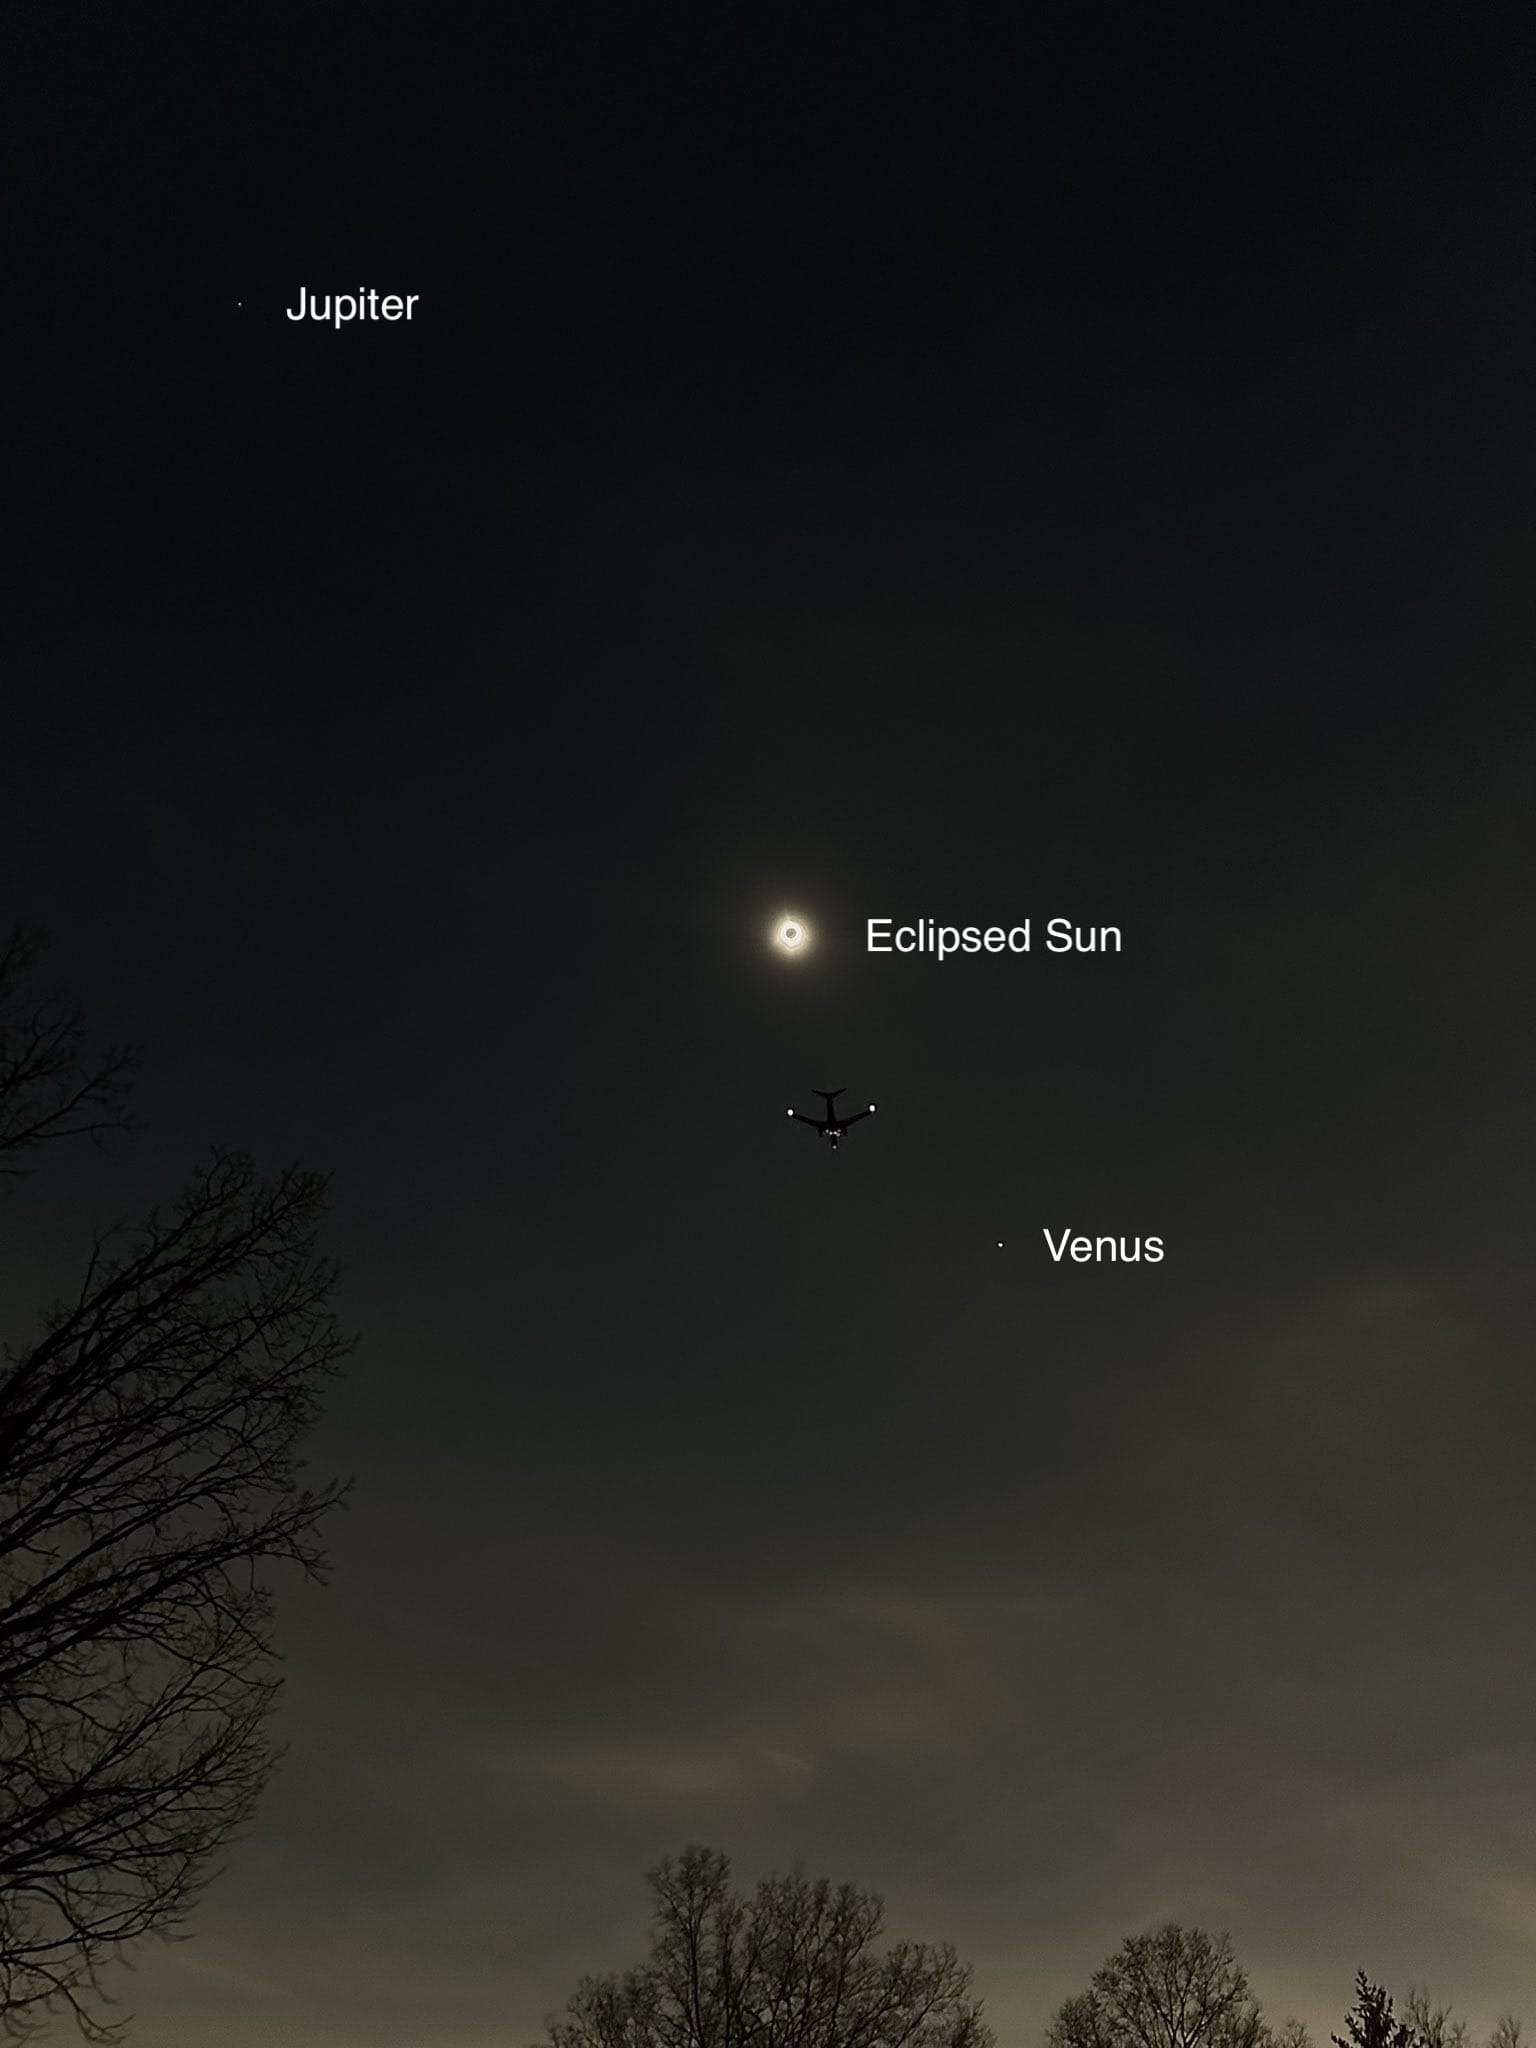 One more photo of the eclipsed sun with Jupiter and Venus on April 8, 2024